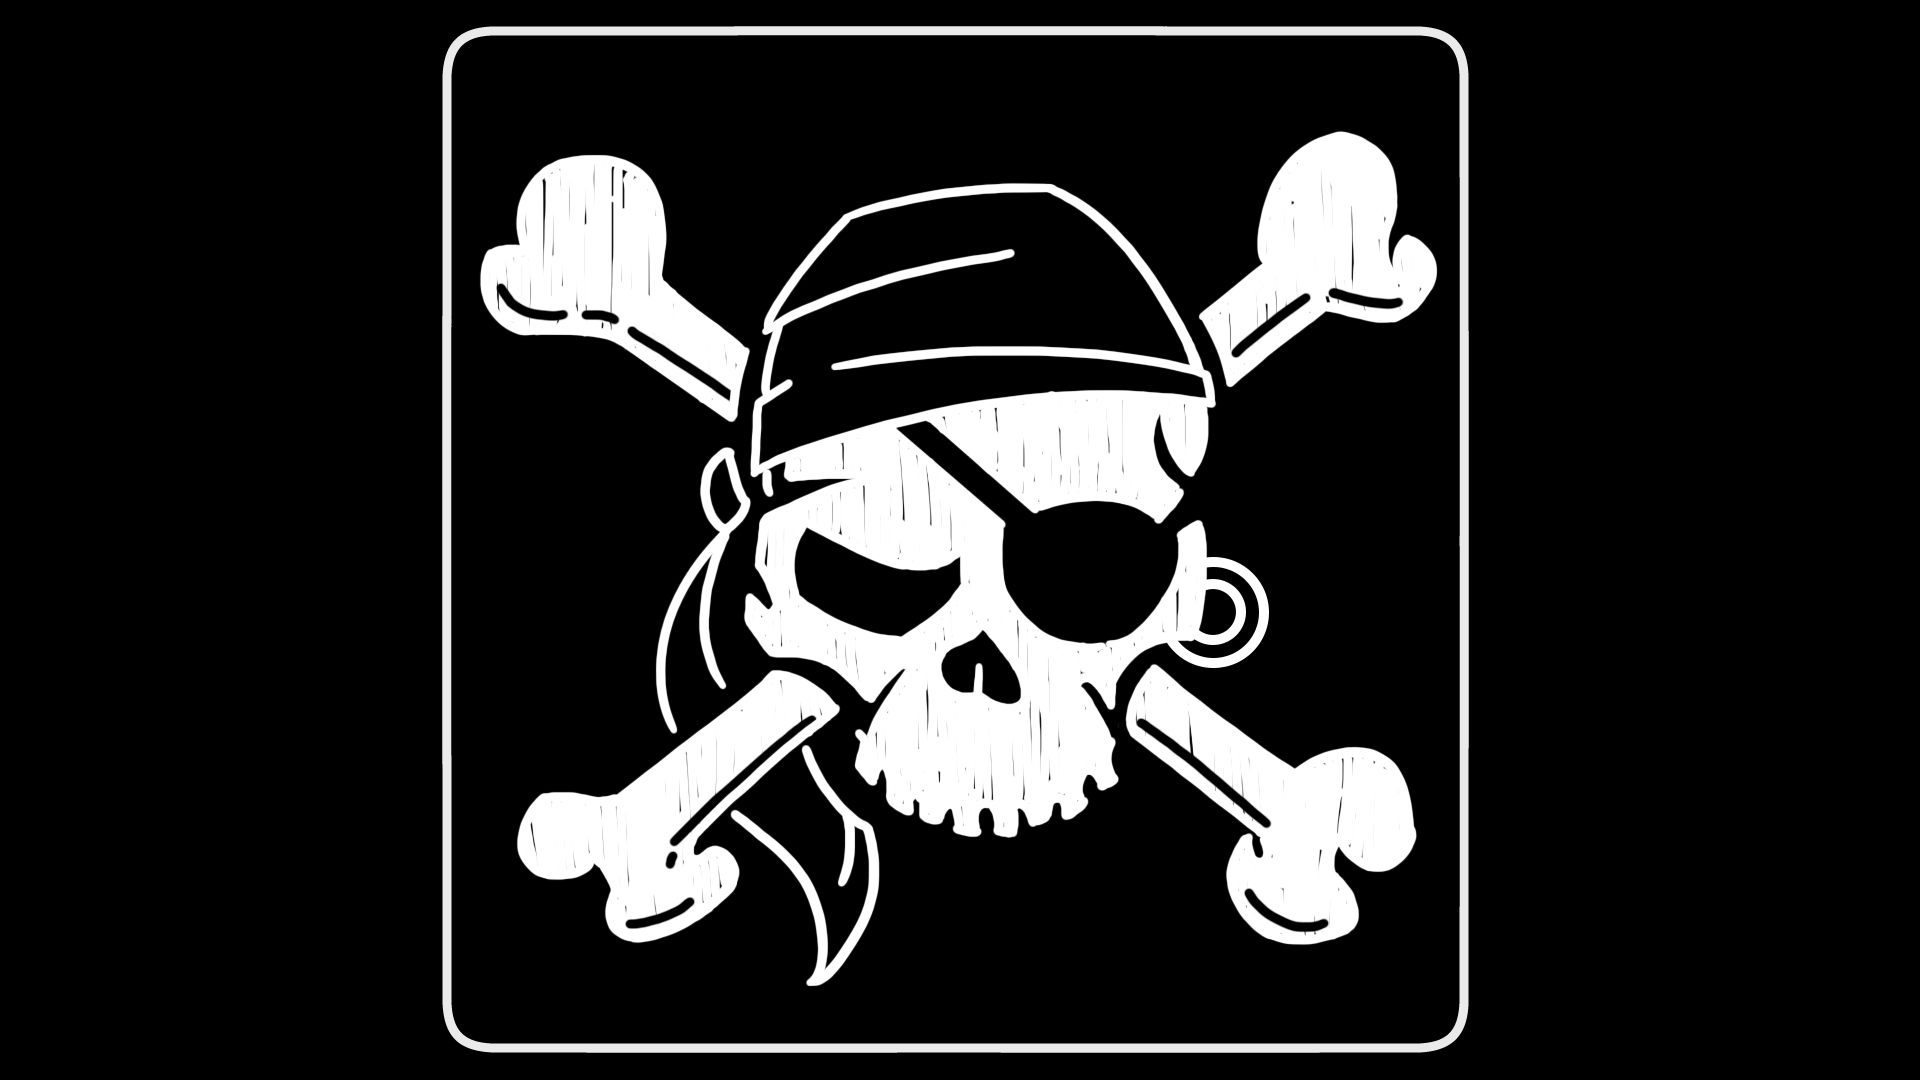 Icon for Radical Piratical